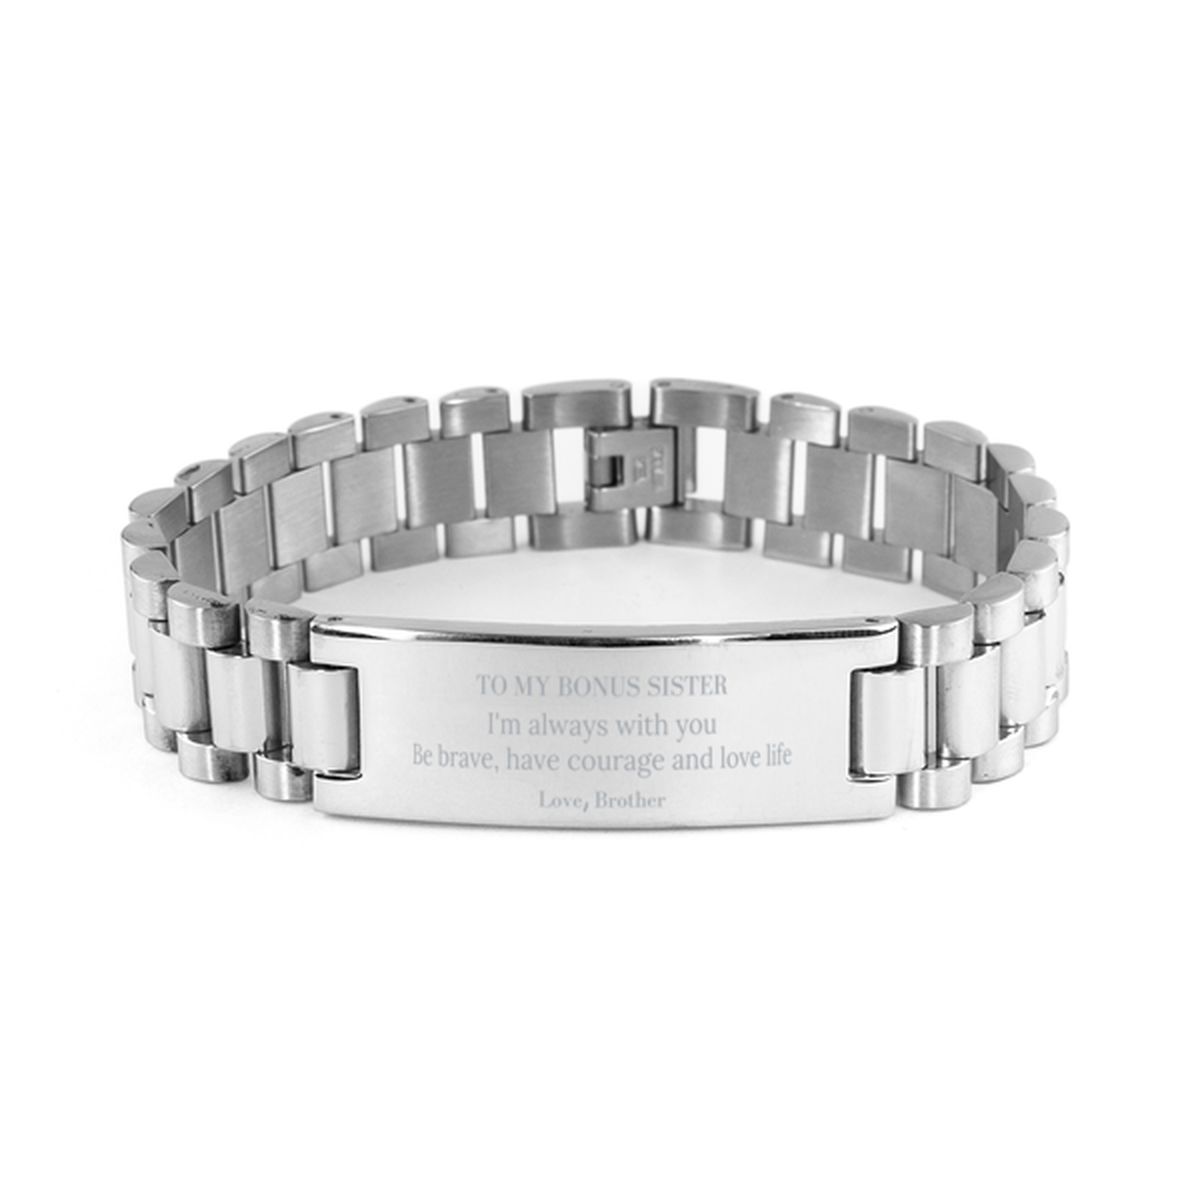 To My Bonus Sister Gifts from Brother, Unique Ladder Stainless Steel Bracelet Inspirational Christmas Birthday Graduation Gifts for Bonus Sister I'm always with you. Be brave, have courage and love life. Love, Brother